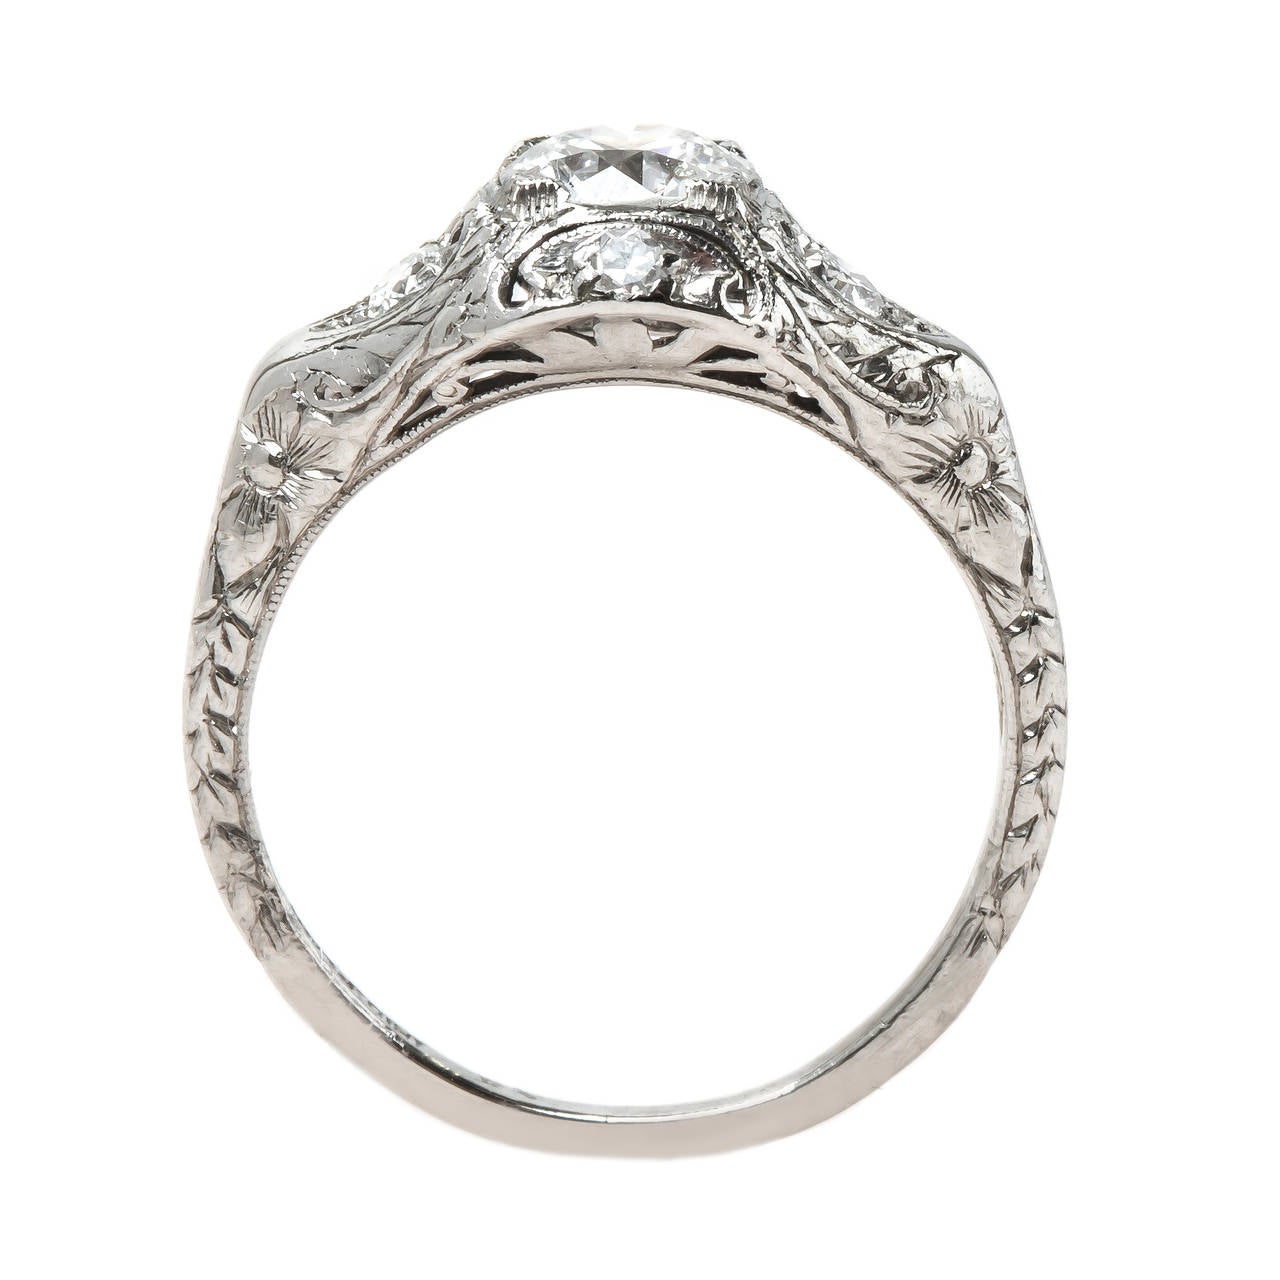 Enchanting Art Deco Engagement Ring with Floral Engraving 1